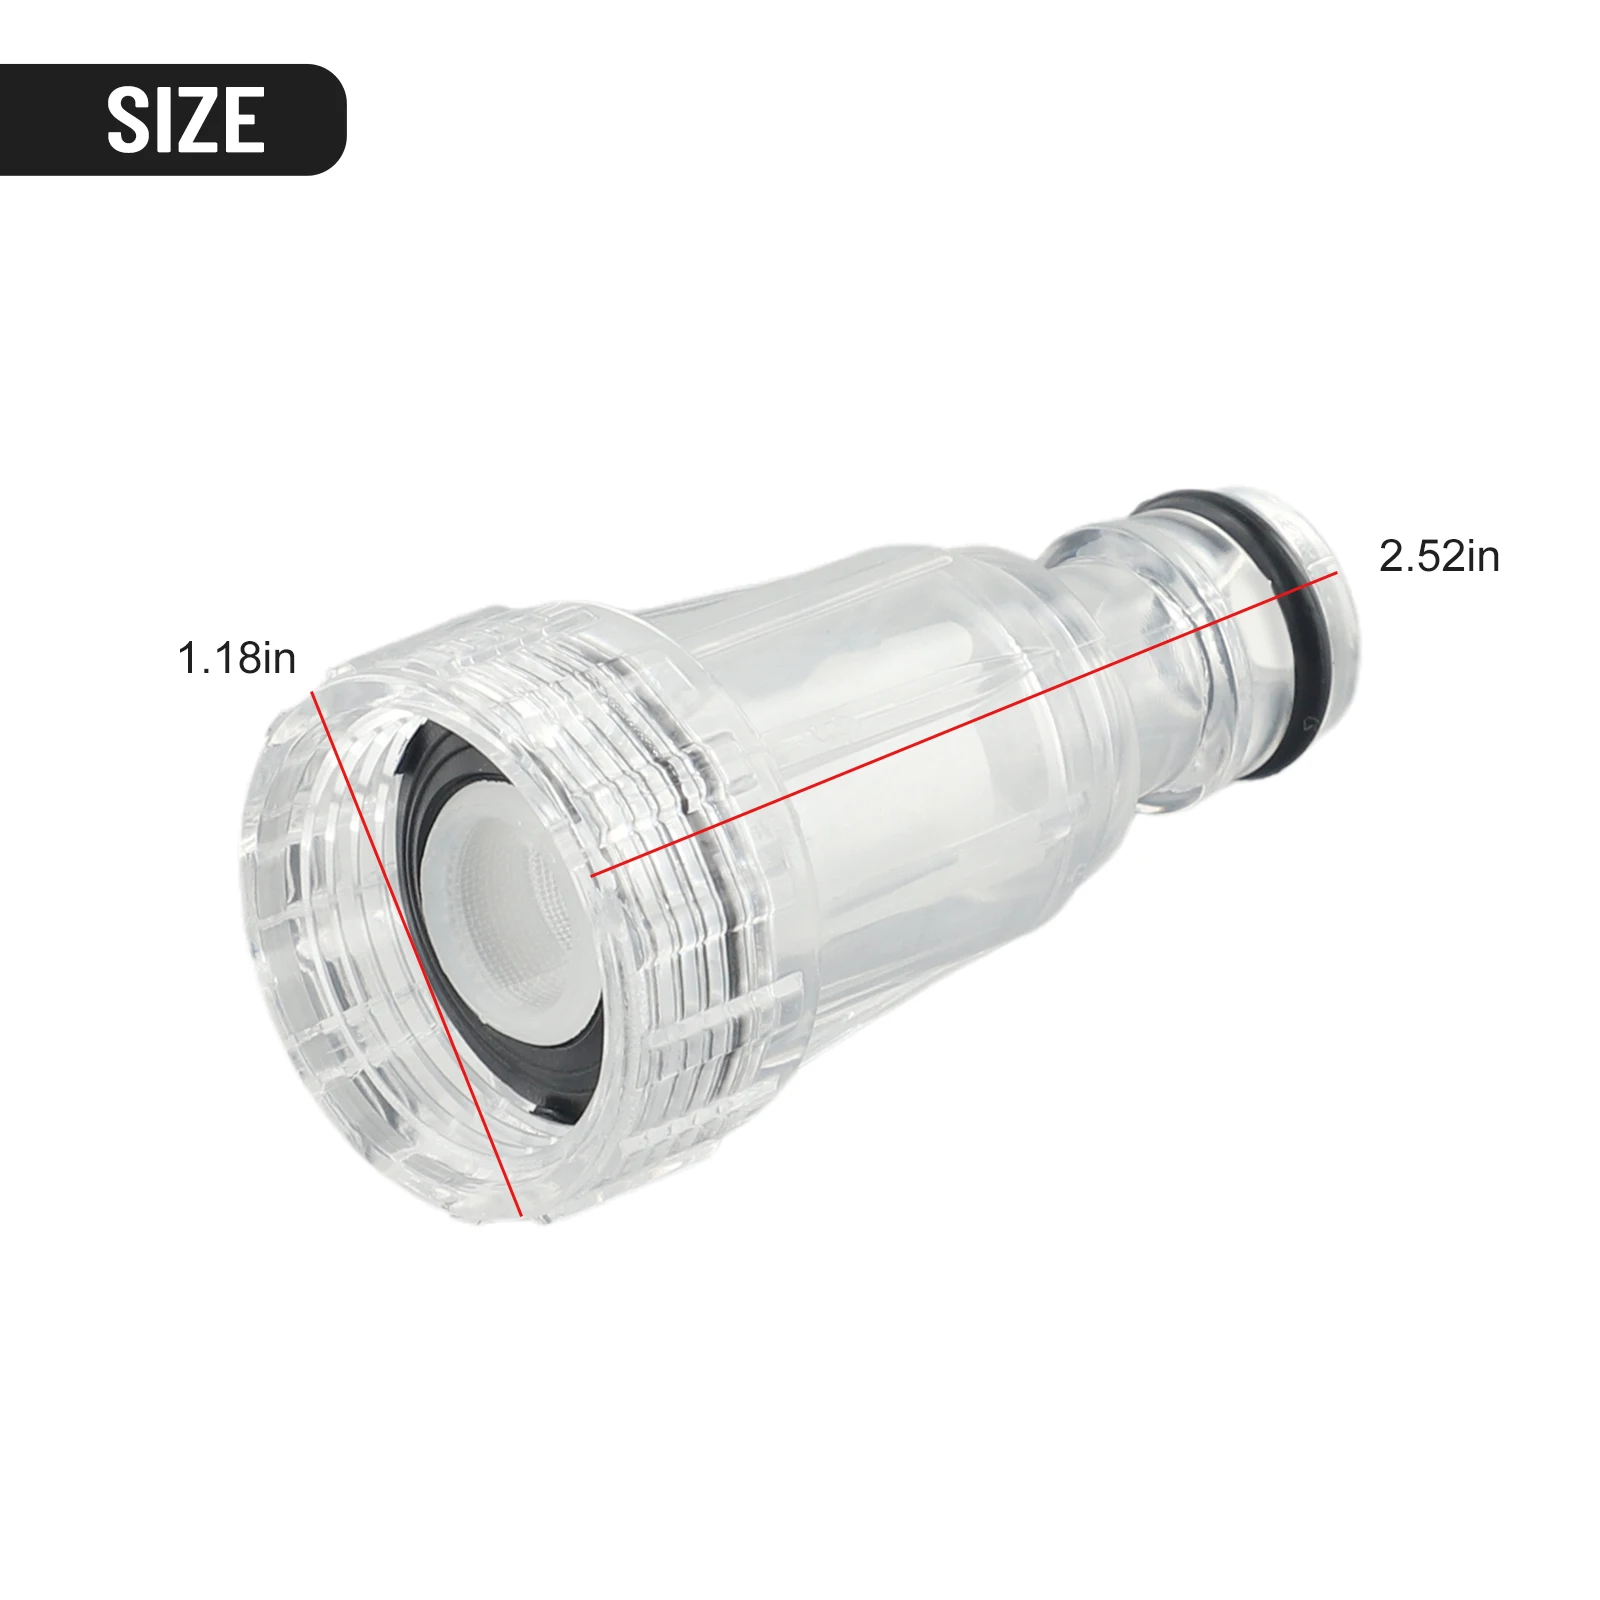 1pcs High Pressure Connection Filter+2pcs Nets For For Karcher K2-K7 Series Washer Garden Pipe Hose Adapter  Pressure Washers 2pcs petrol fuel hose pipe for stihl m 00t m 70 m 80 chainsaw grass trimmer garden lawn mower power tool replace part access